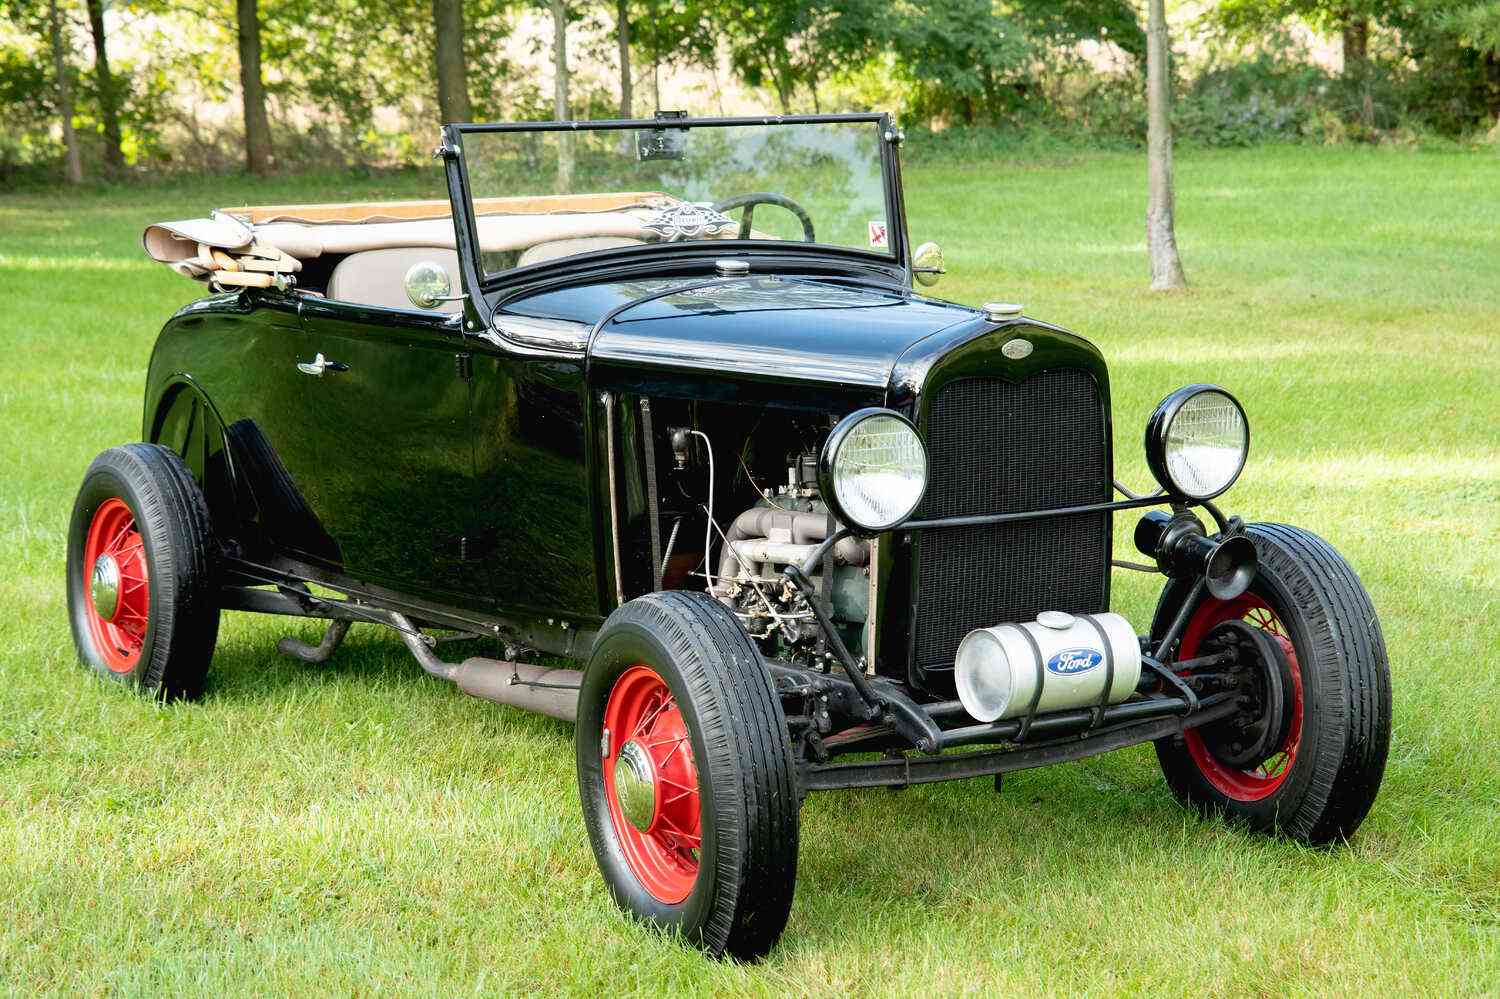 The Model A Speed Demon: A tribute to America's fastest car